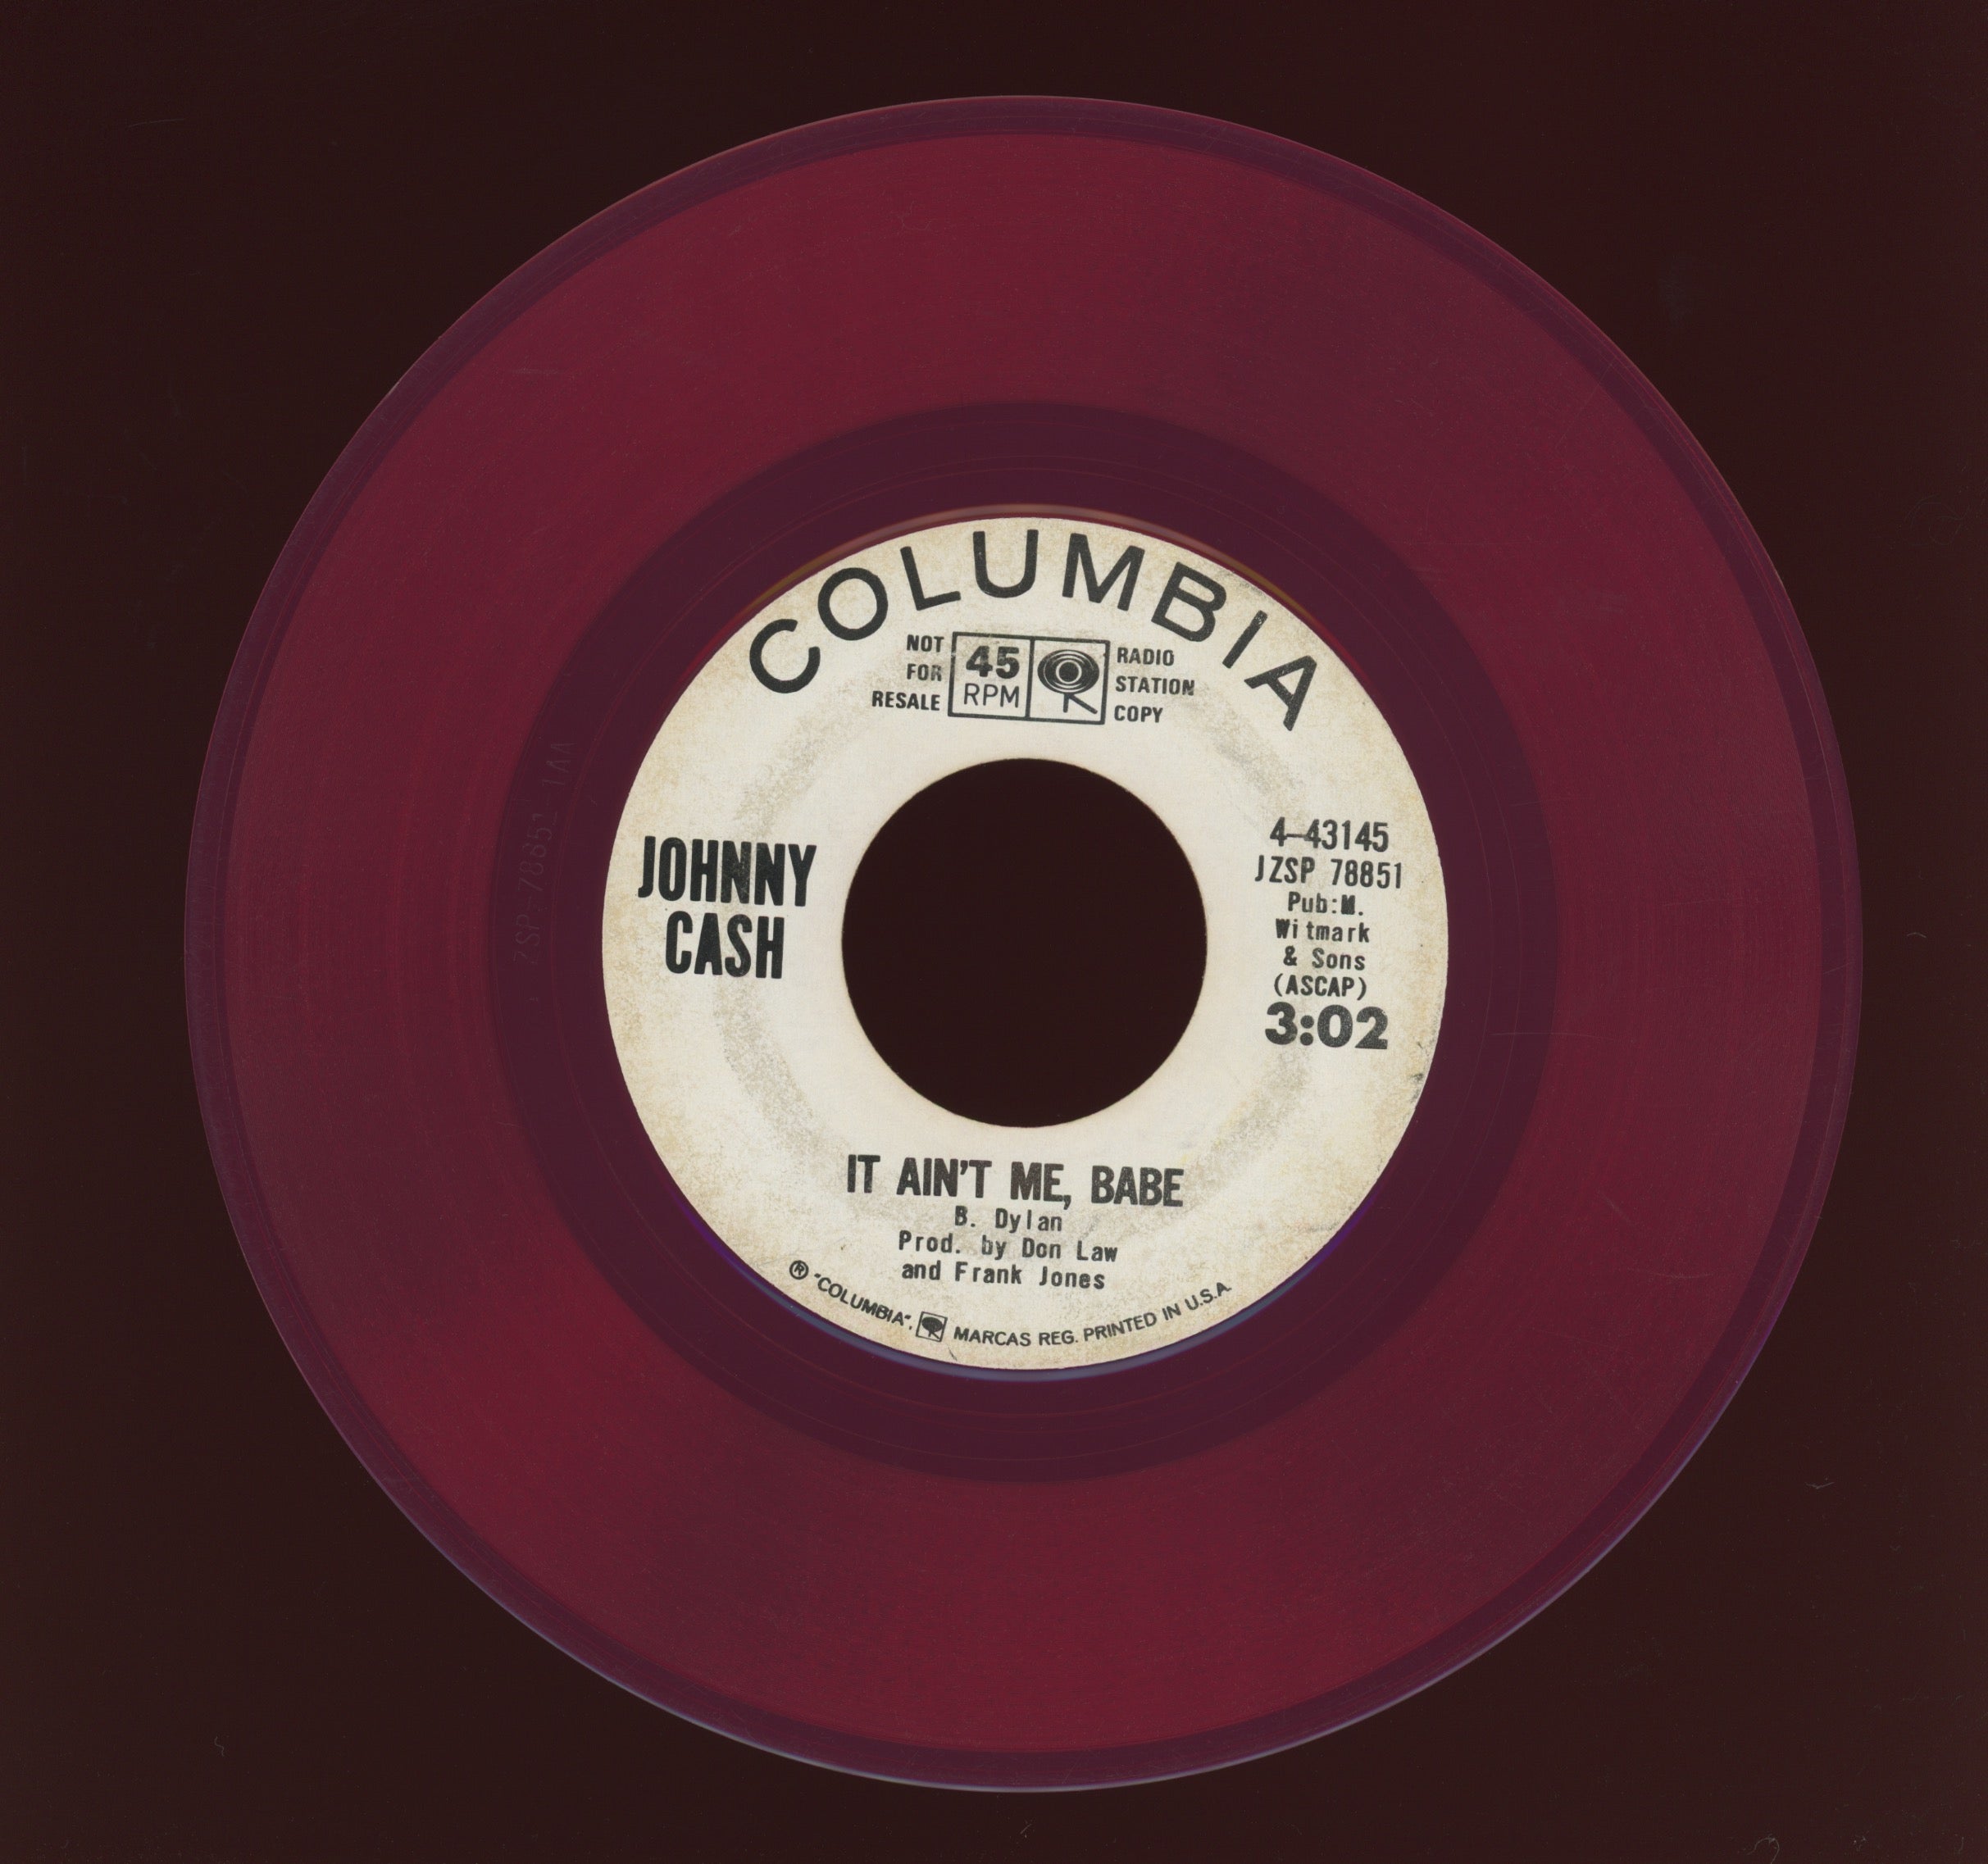 Johnny Cash - It Ain't Me, Babe on Columbia Red Vinyl Promo